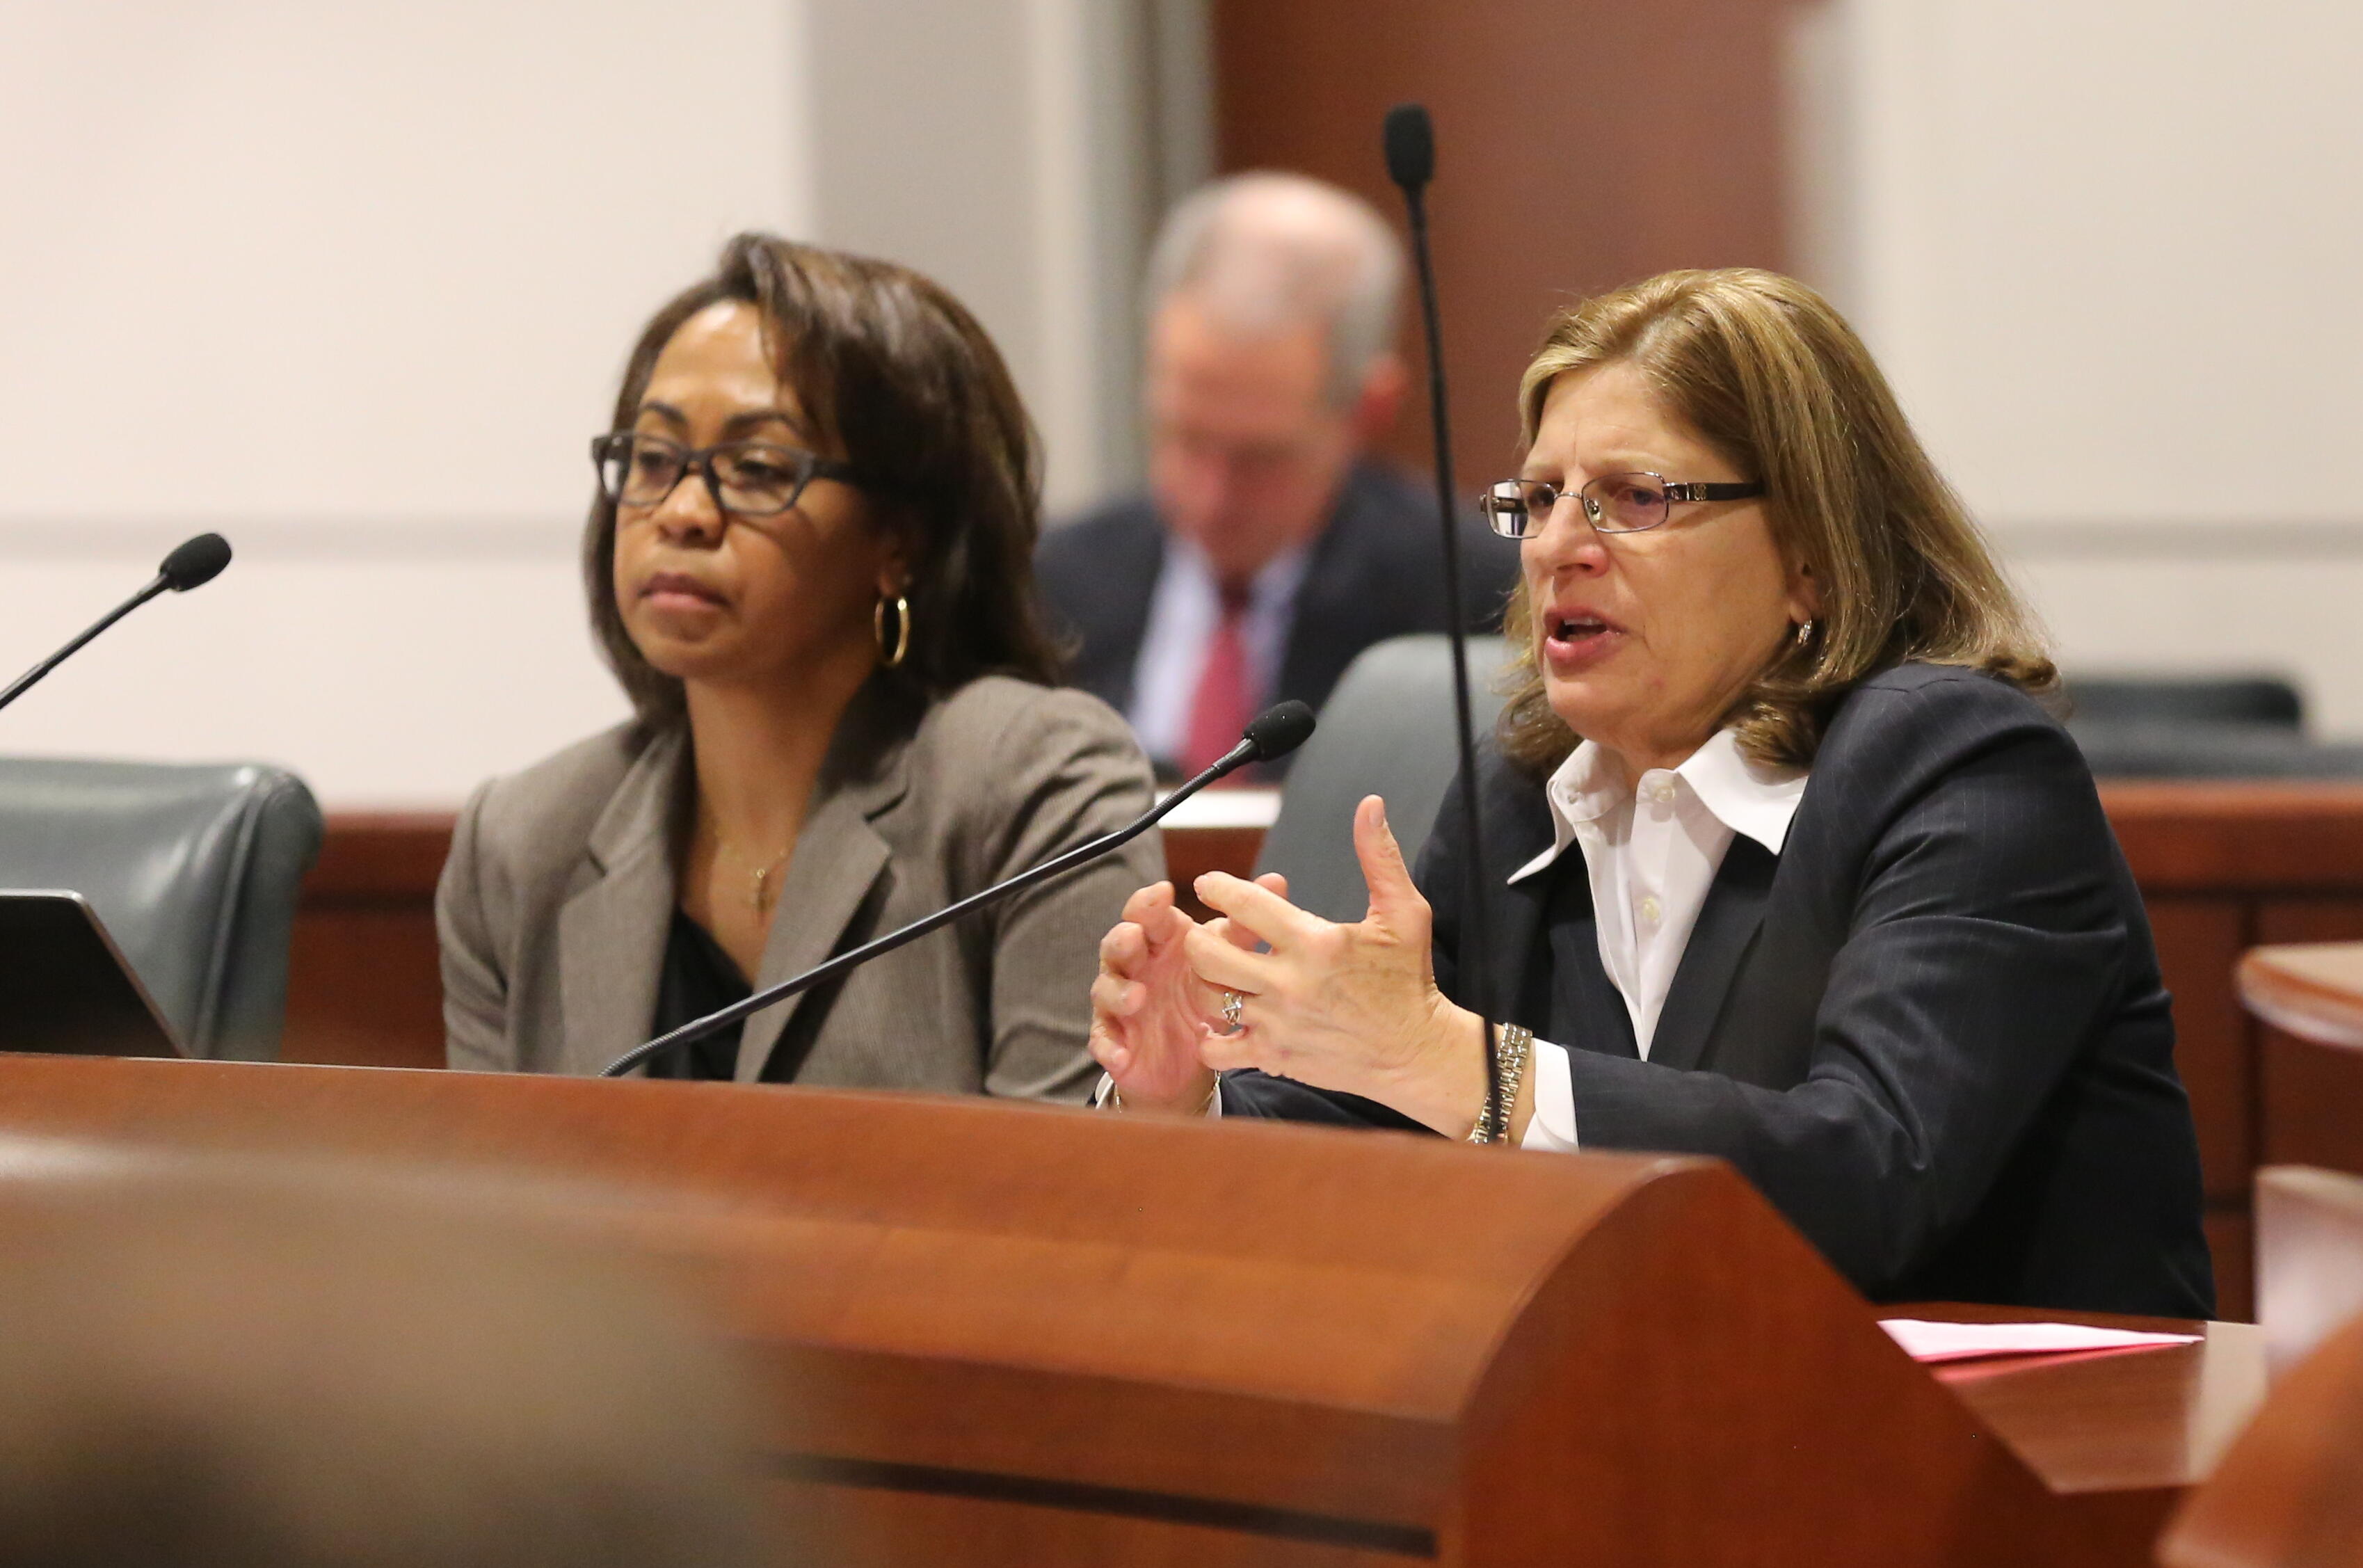 Keeping Kids in School steering committee chairs, Judge Stacy Boulware Eurie (left) and Judge Donna Groman, present on the connections between trauma, truancy and school discipline practices for court-involved youth. Watch here. Slides are available here.